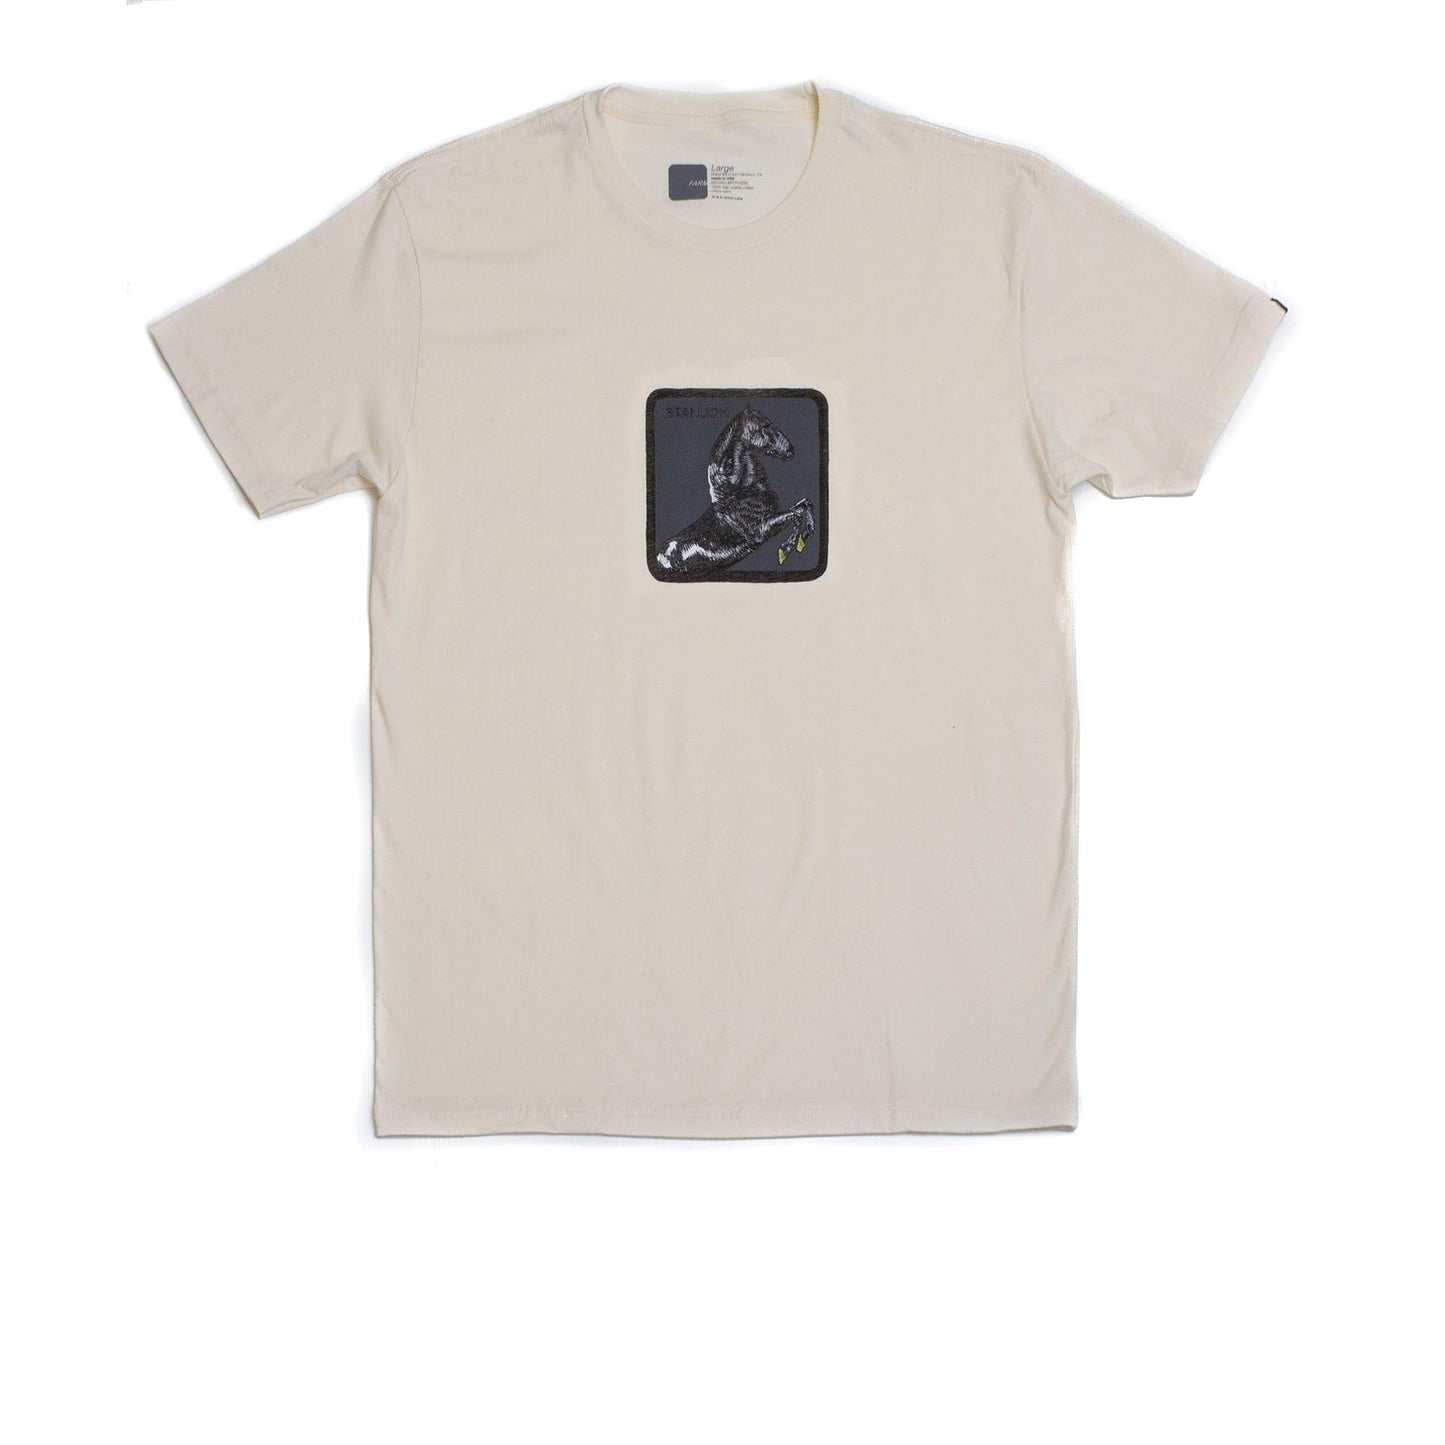 Goorin Bros "Very Stable" T-Shirt in Cream color